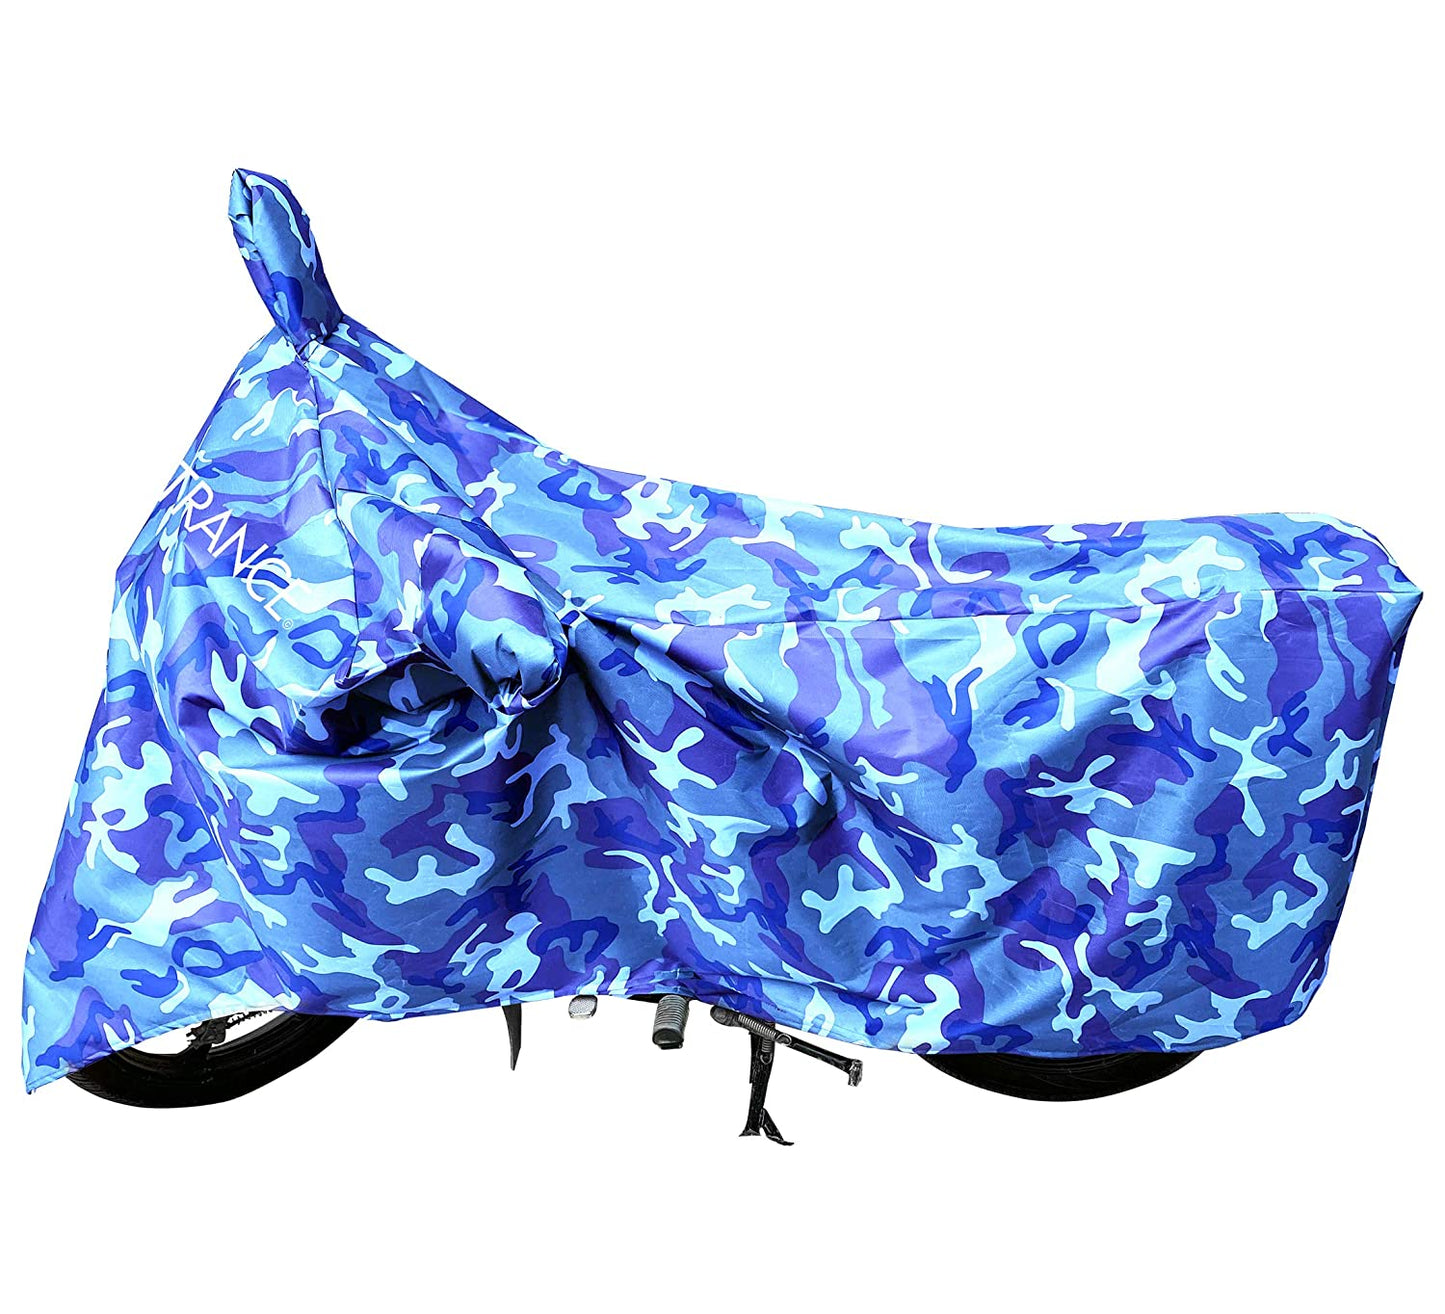 MotoTrance Jungle Bike Body Covers For TVS Sport - Interlock-Stitched Waterproof and Heat Resistant with Mirror Pockets